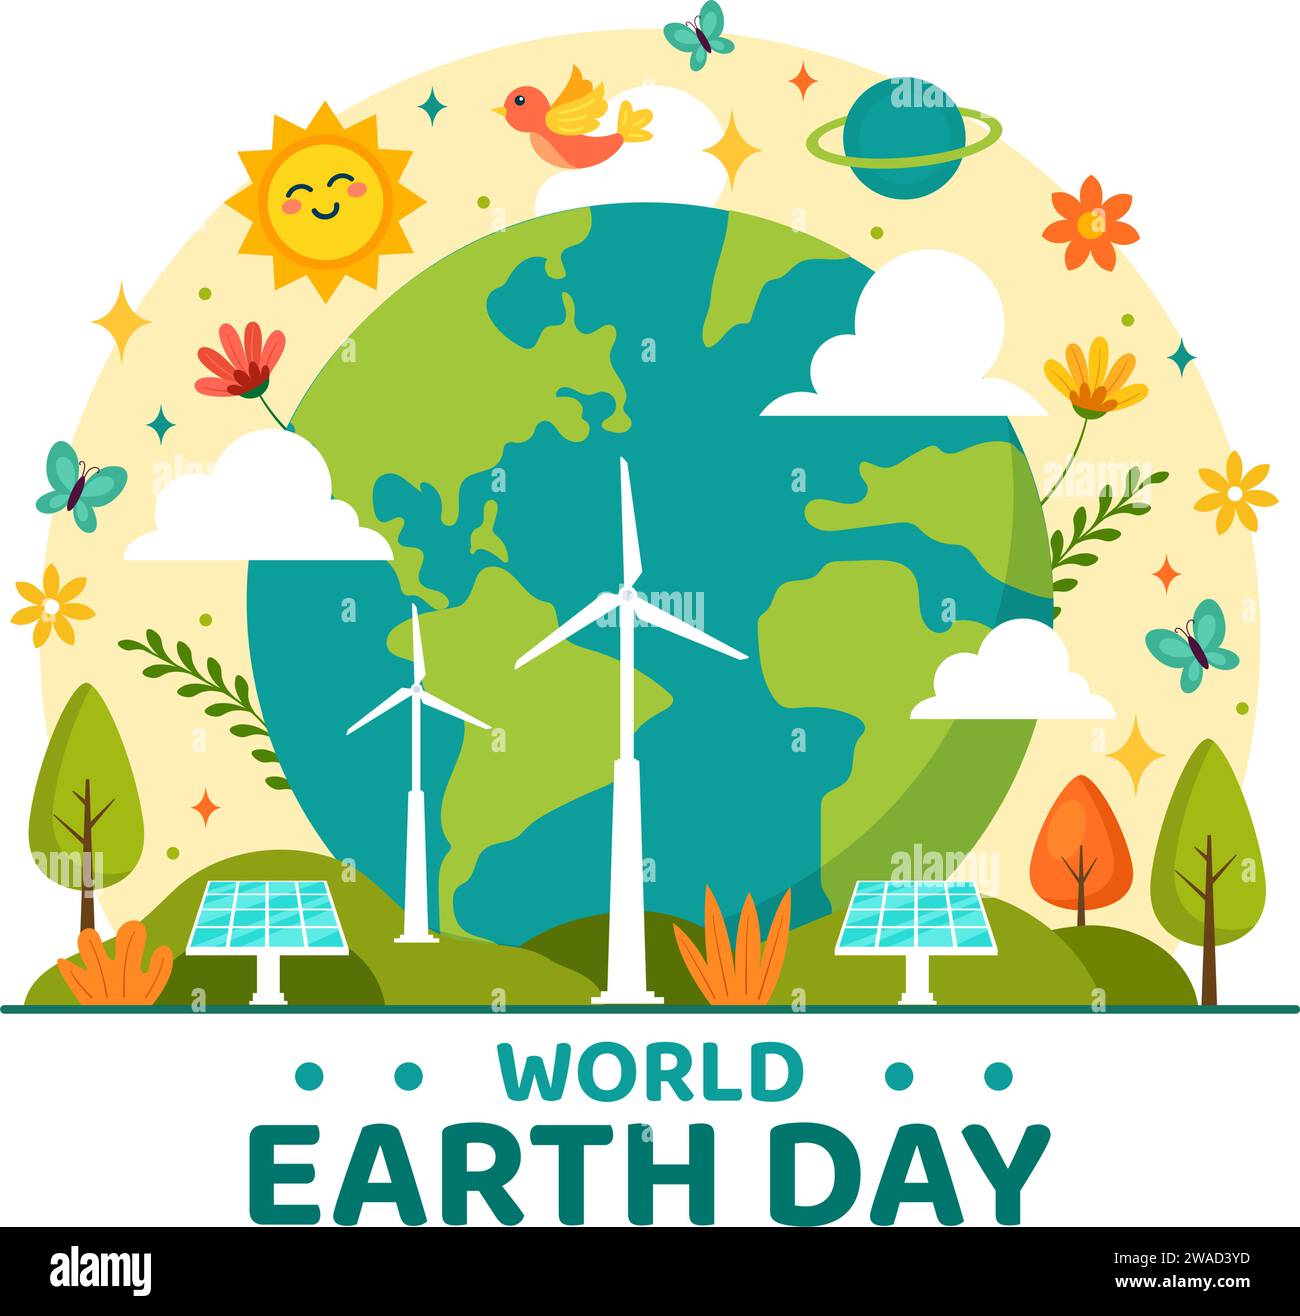 World Earth Day Vector Illustration On April 22 With World Map And